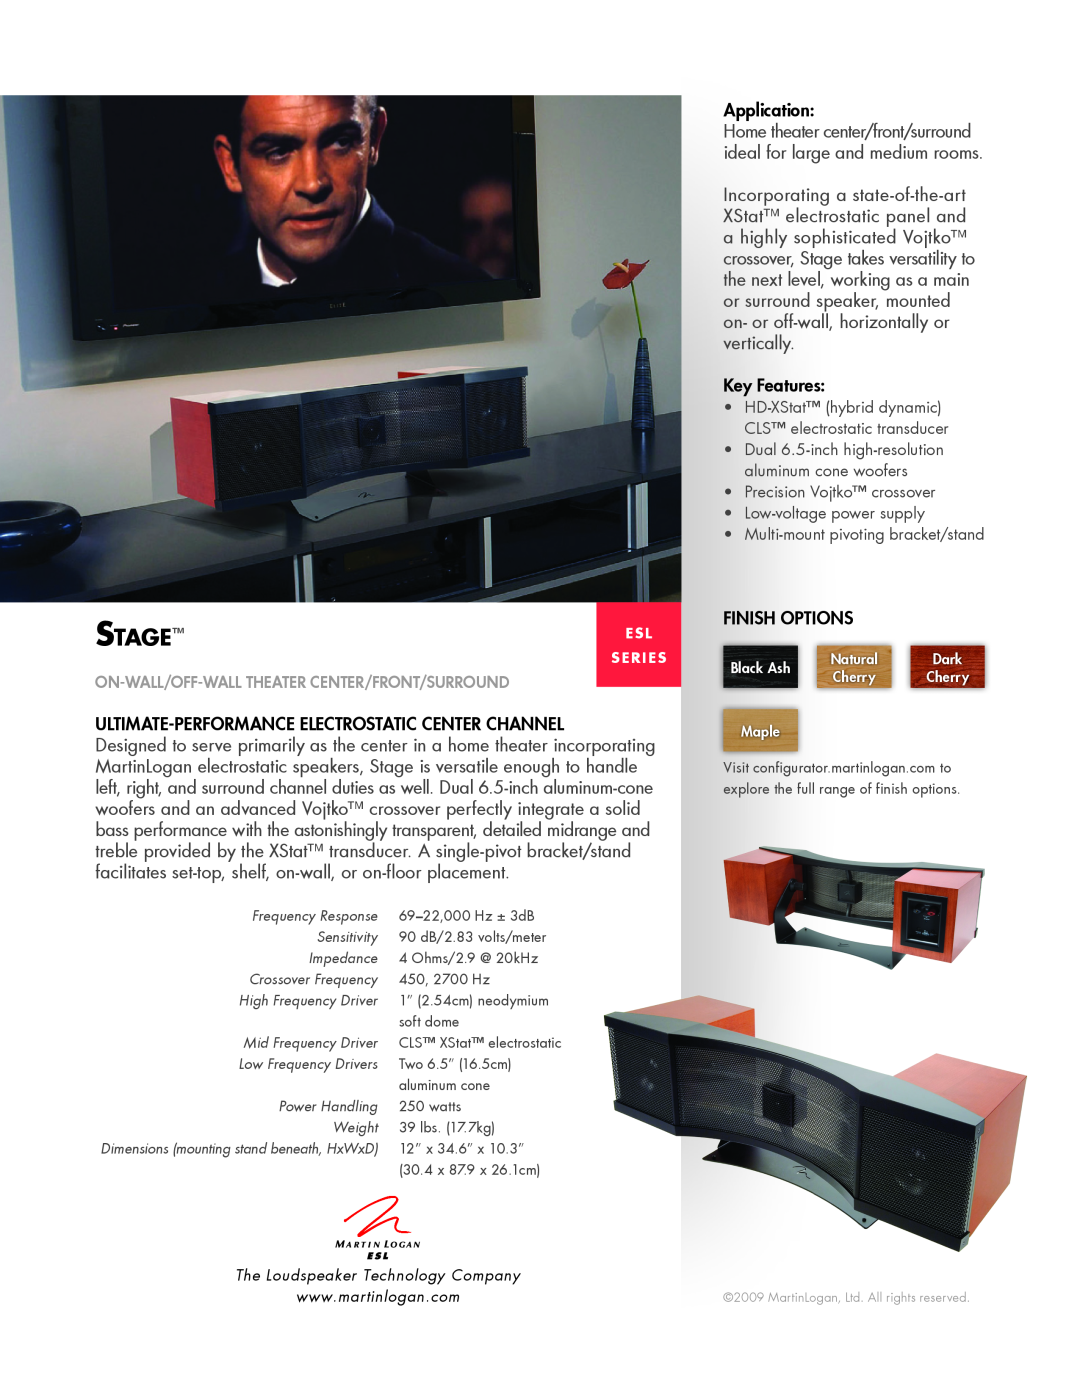 MartinLogan ESL Series dimensions Stage, Ultimate-PerformanceElectrostatic Center Channel, Application, Key Features 